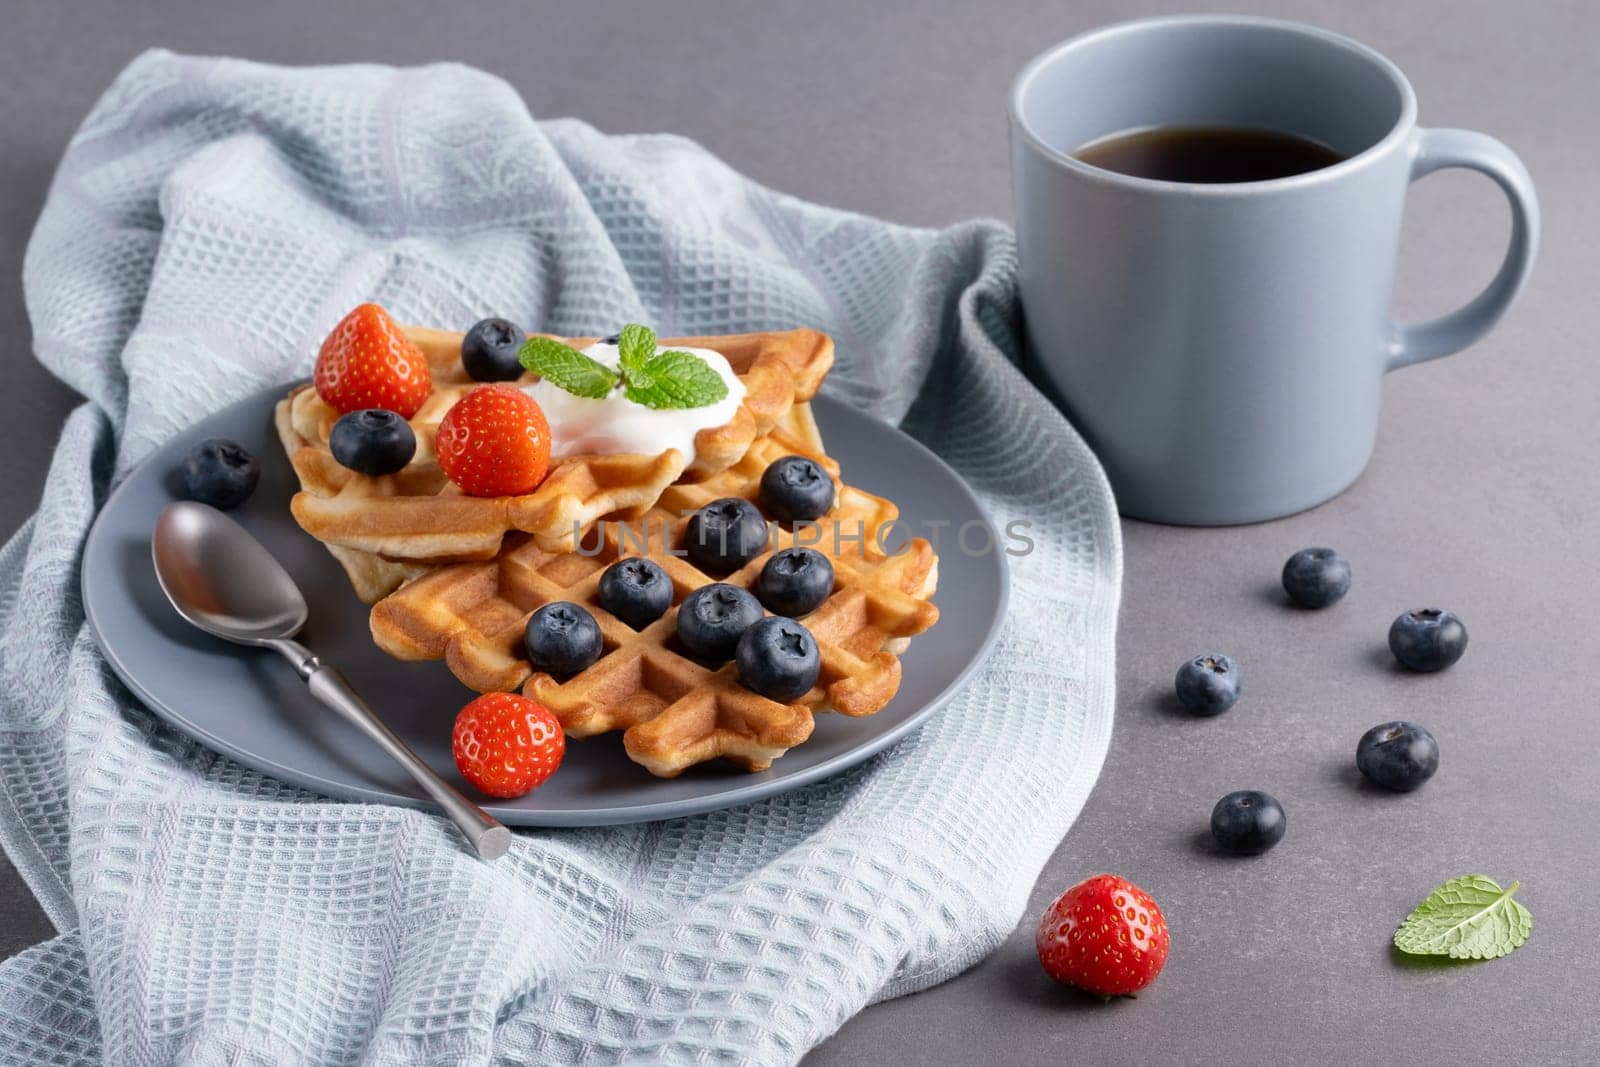 Delicious waffles with whipped cream, strawberries and blueberries.